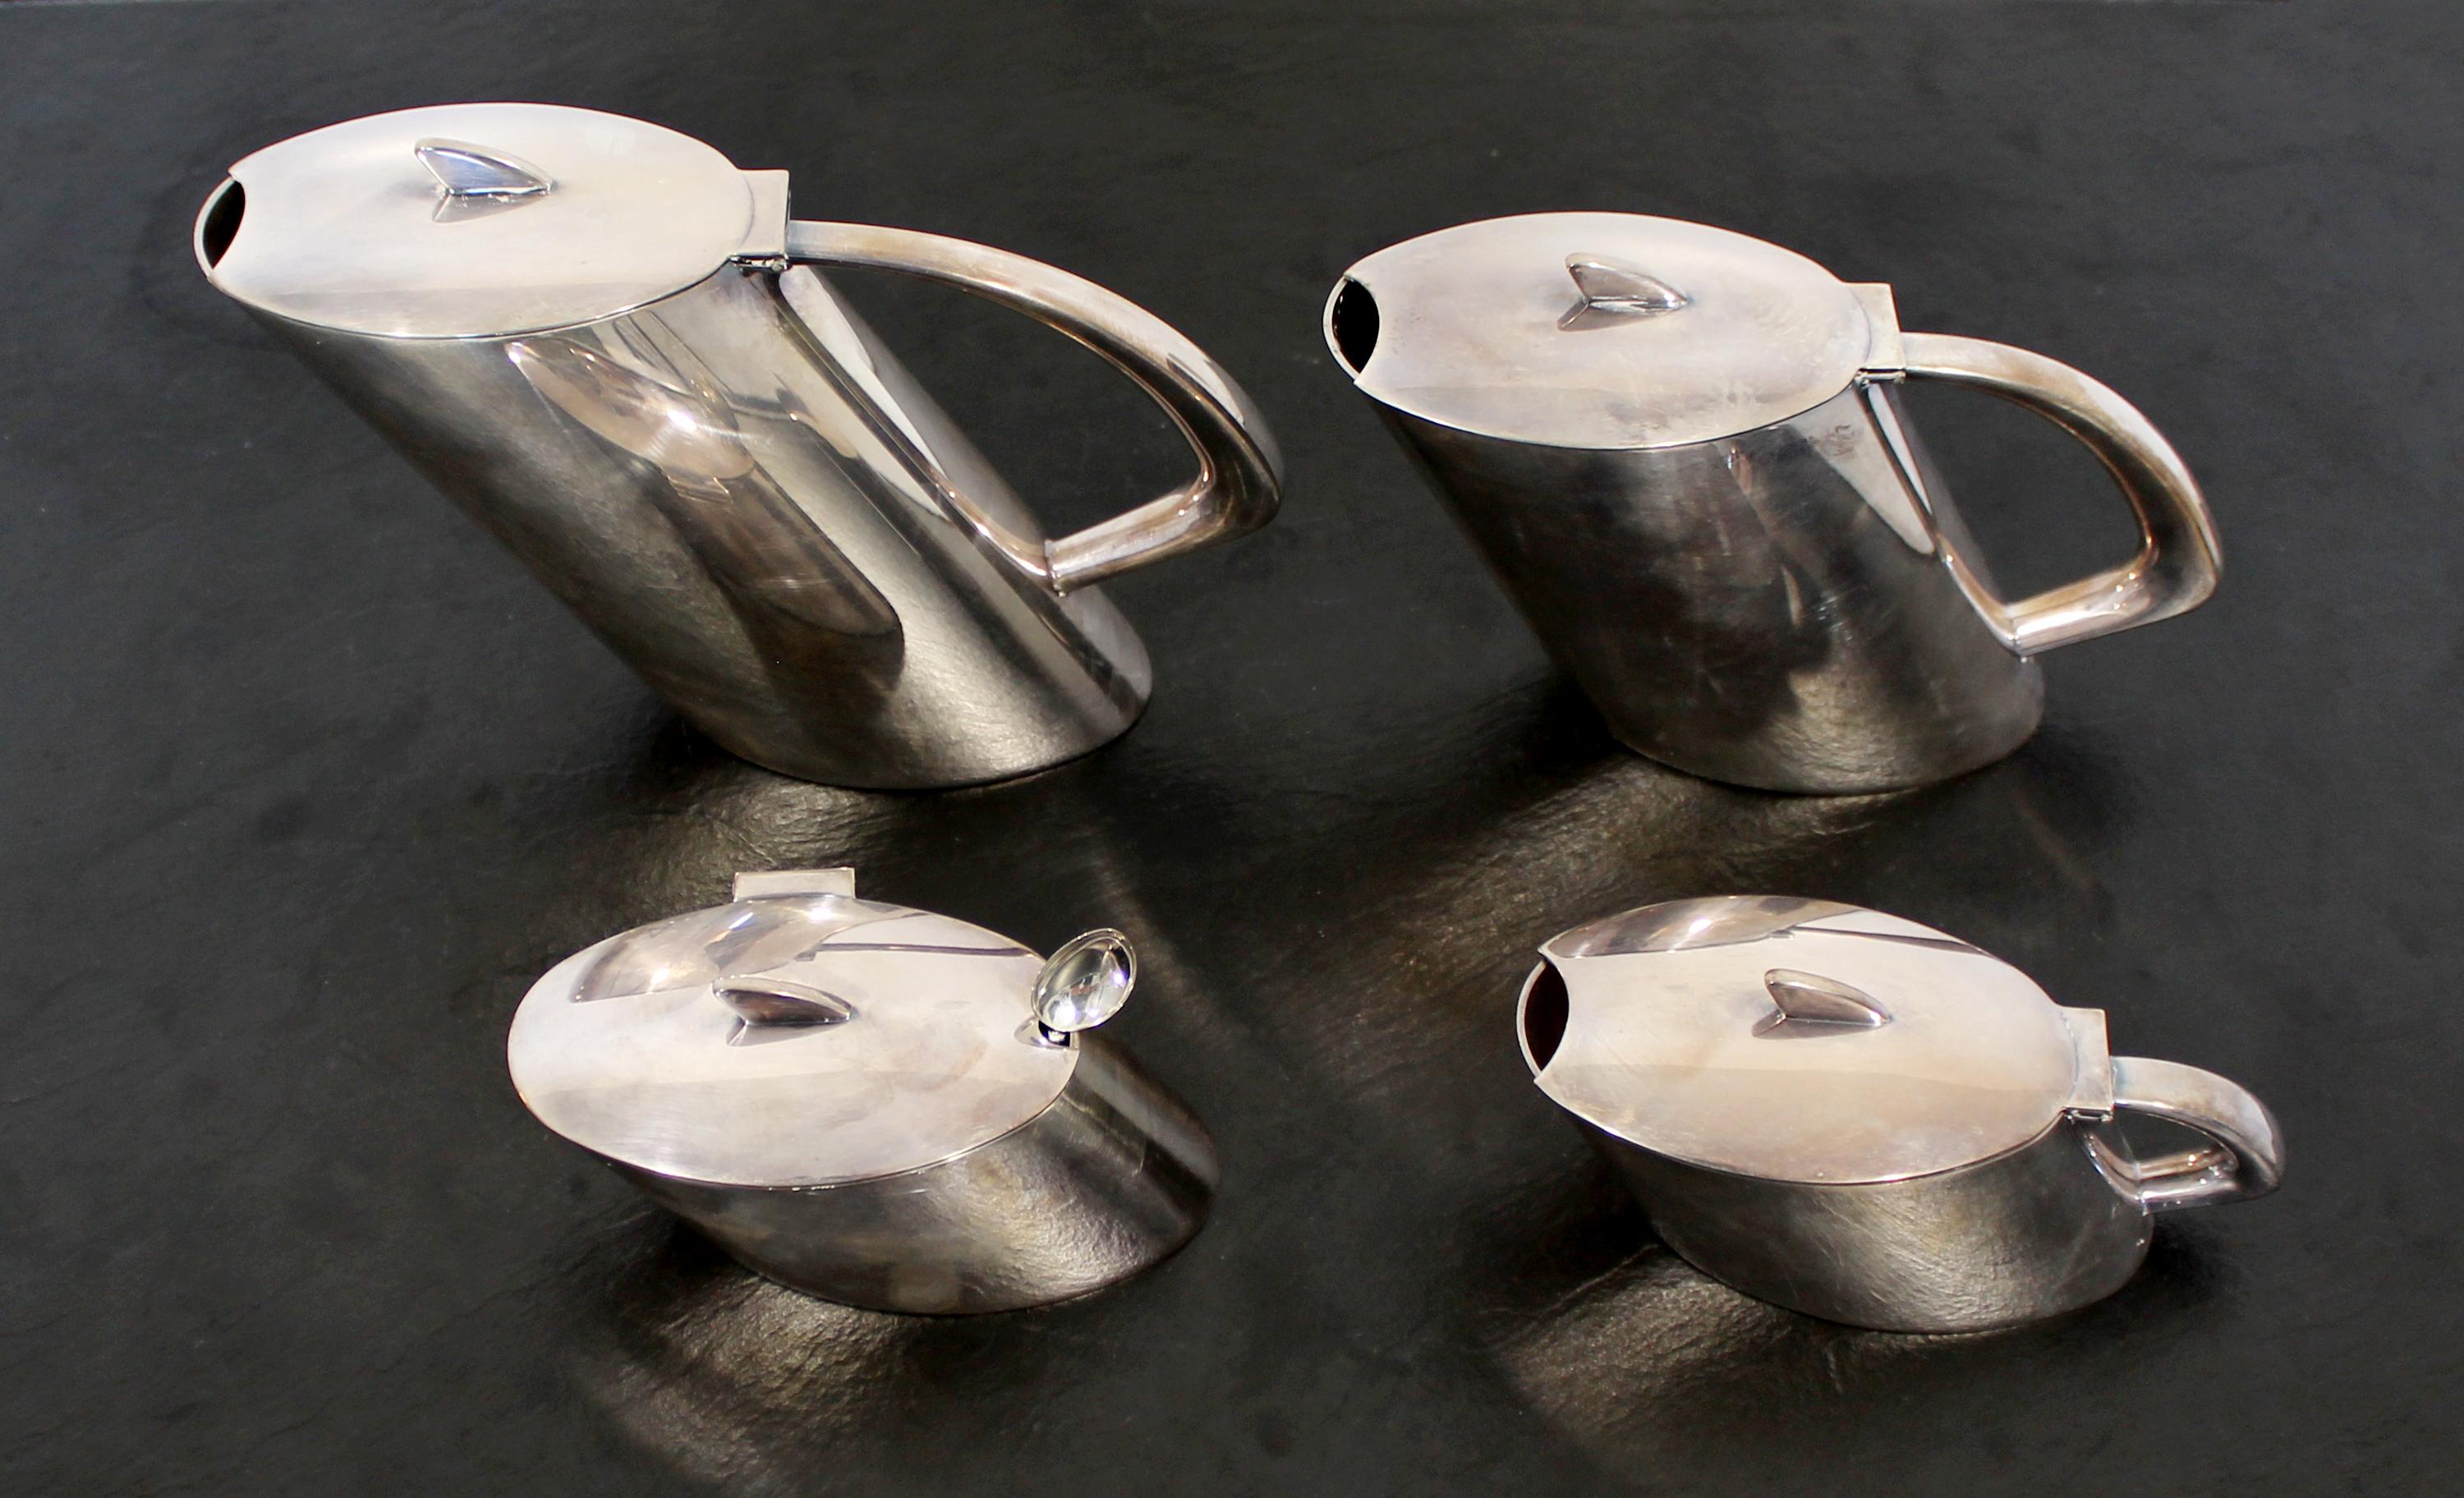 For your consideration is a sterling silver, four piece tea & coffee service, handmade by Christoph Widmann, in Germany, circa 1990. The unique shapes of the pieces give them the feel of a speeding train. Winner of Frankfurt Fair award at the time